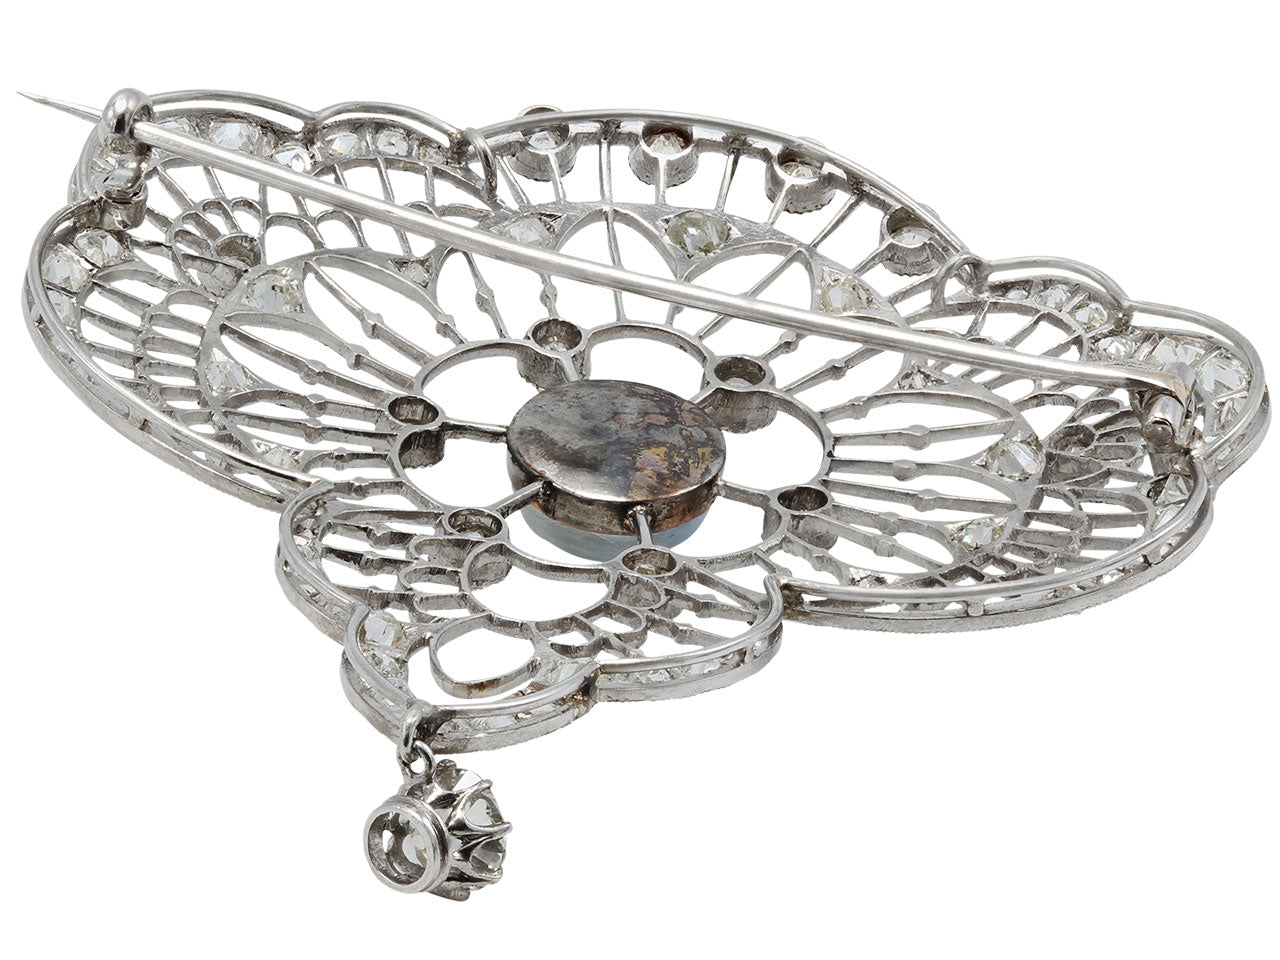 Antique Edwardian Moonstone and Diamond Brooch in Platinum